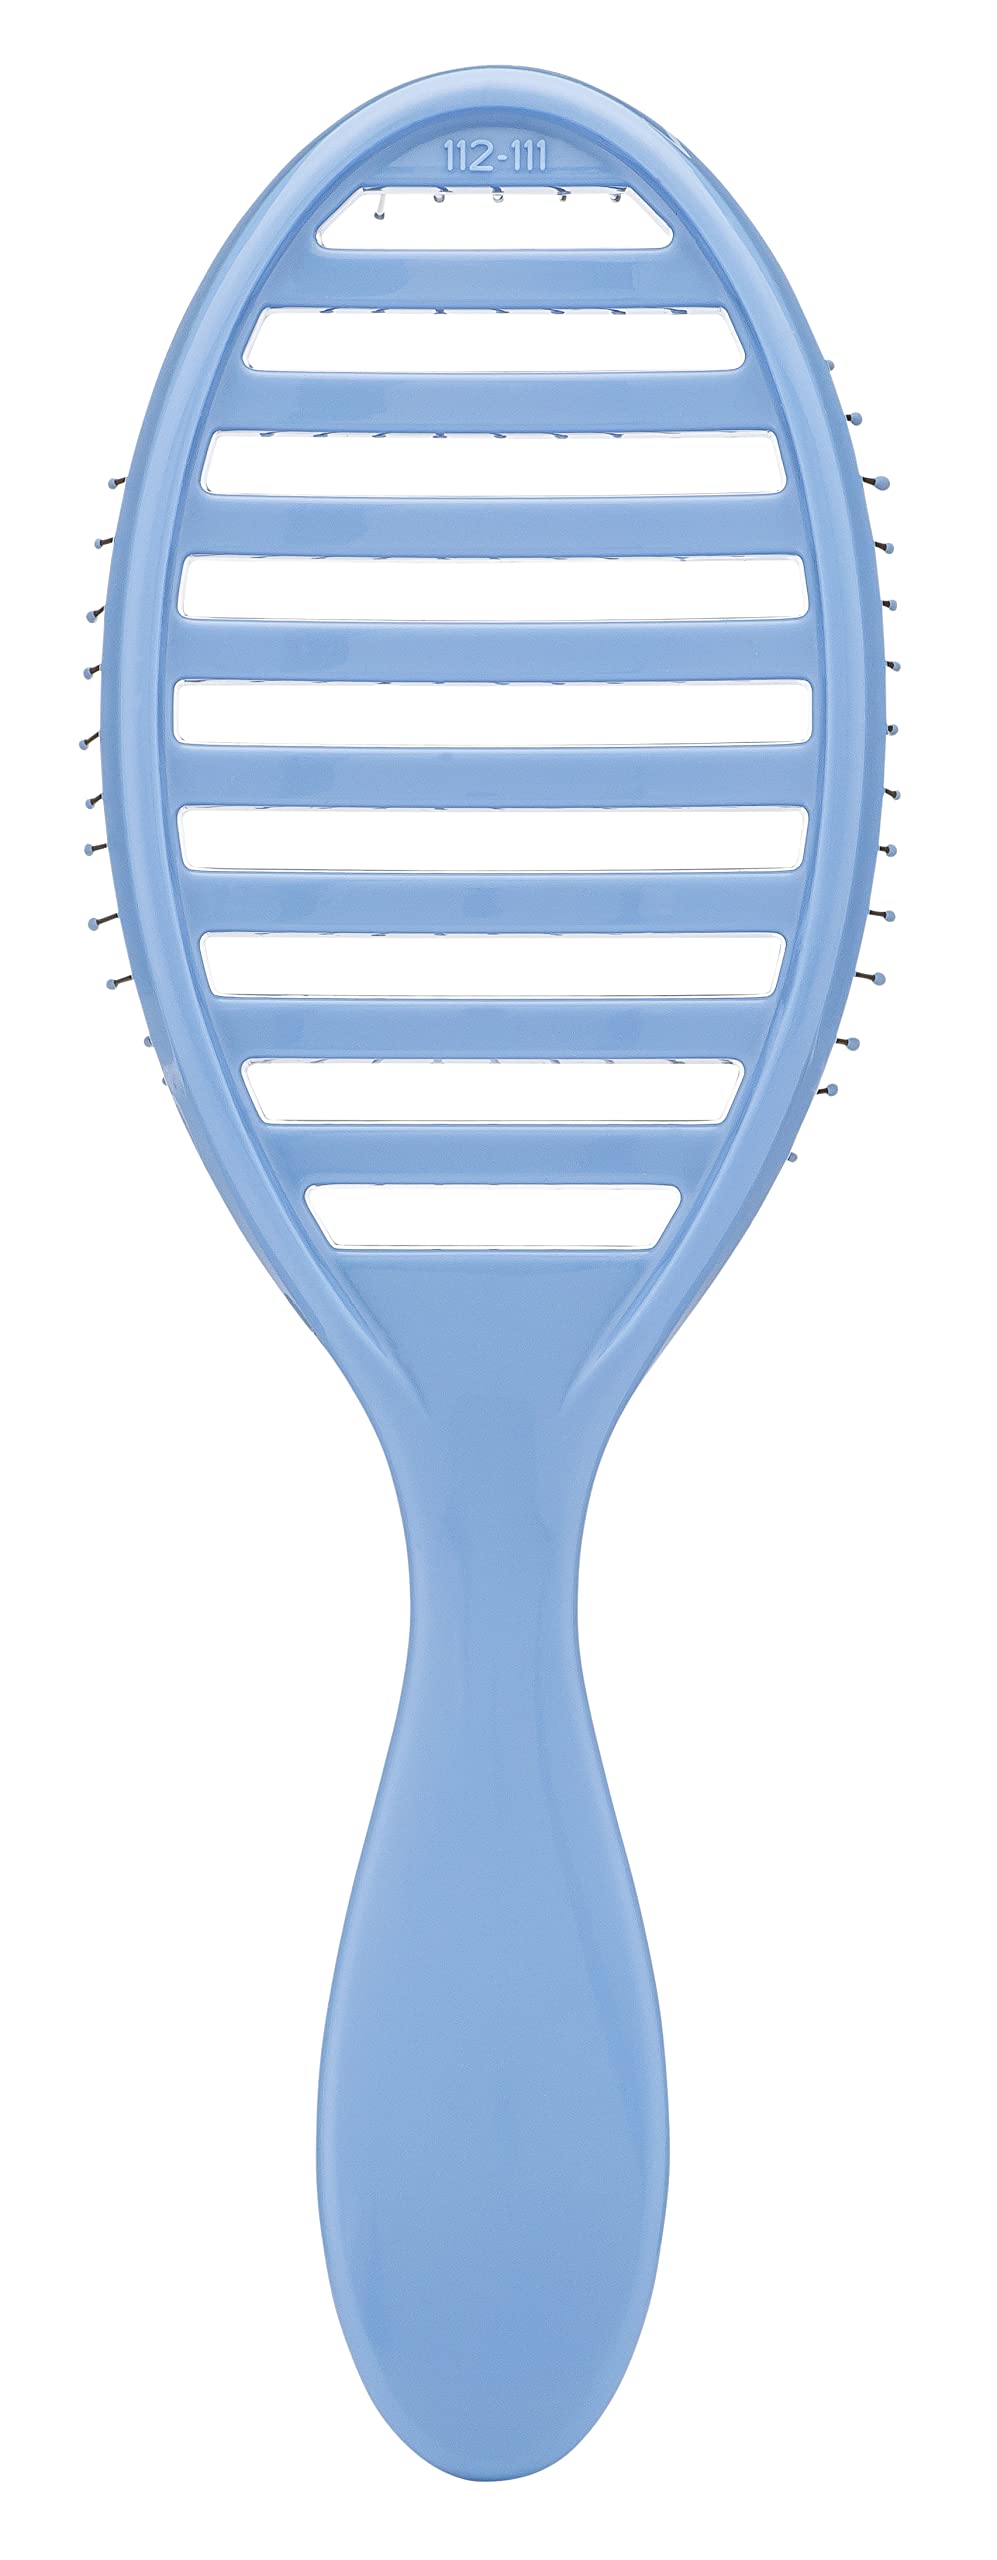 Wet Brush Speed Dry Hair Brush - Free Spirit, Sky - Vented Design and Ultra Soft HeatFlex Bristles Are Blow Dry Safe With Ergonomic Handle Manages Tangle and Uncontrollable Hair - Pain-Free